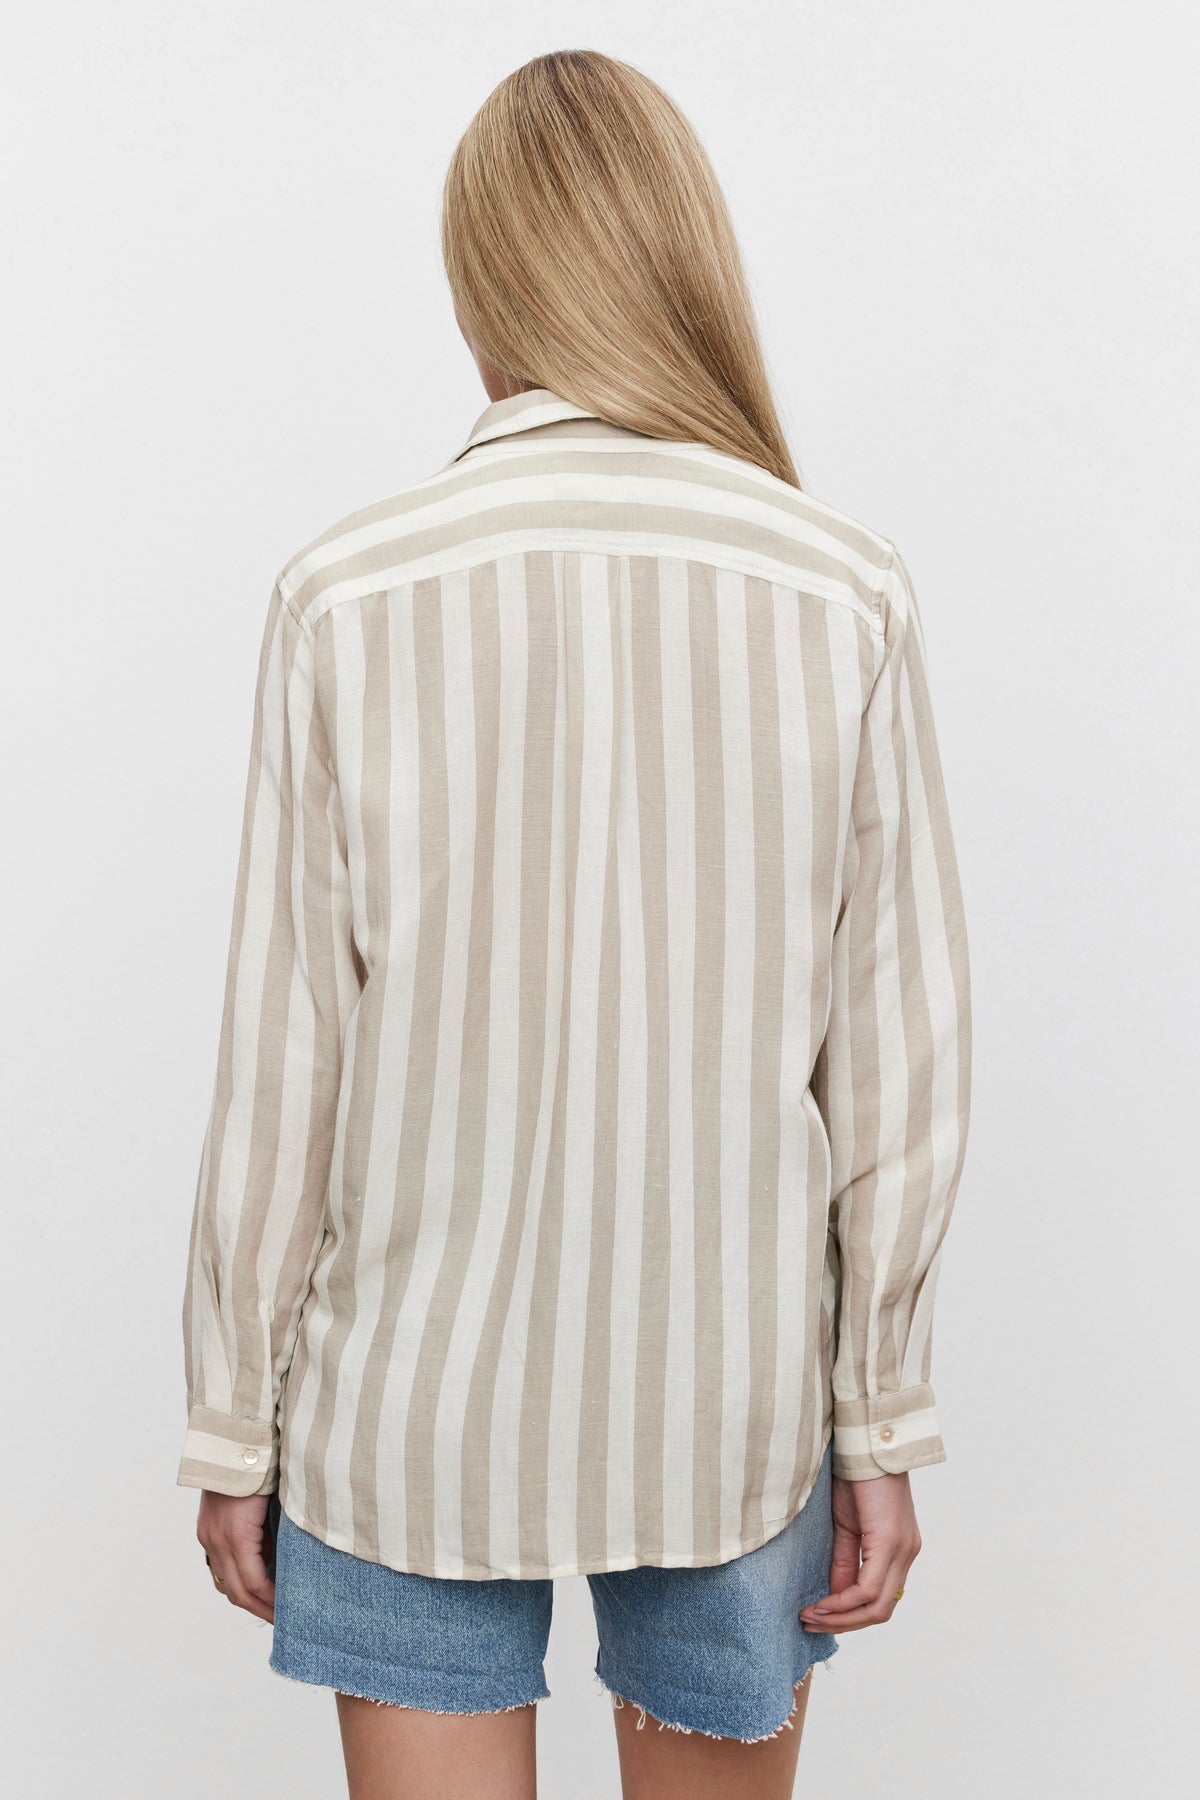 A woman wearing a Velvet by Graham & Spencer HARLOW STRIPED LINEN BUTTON-UP SHIRT in a relaxed fit, shown from the back.-36247888134337